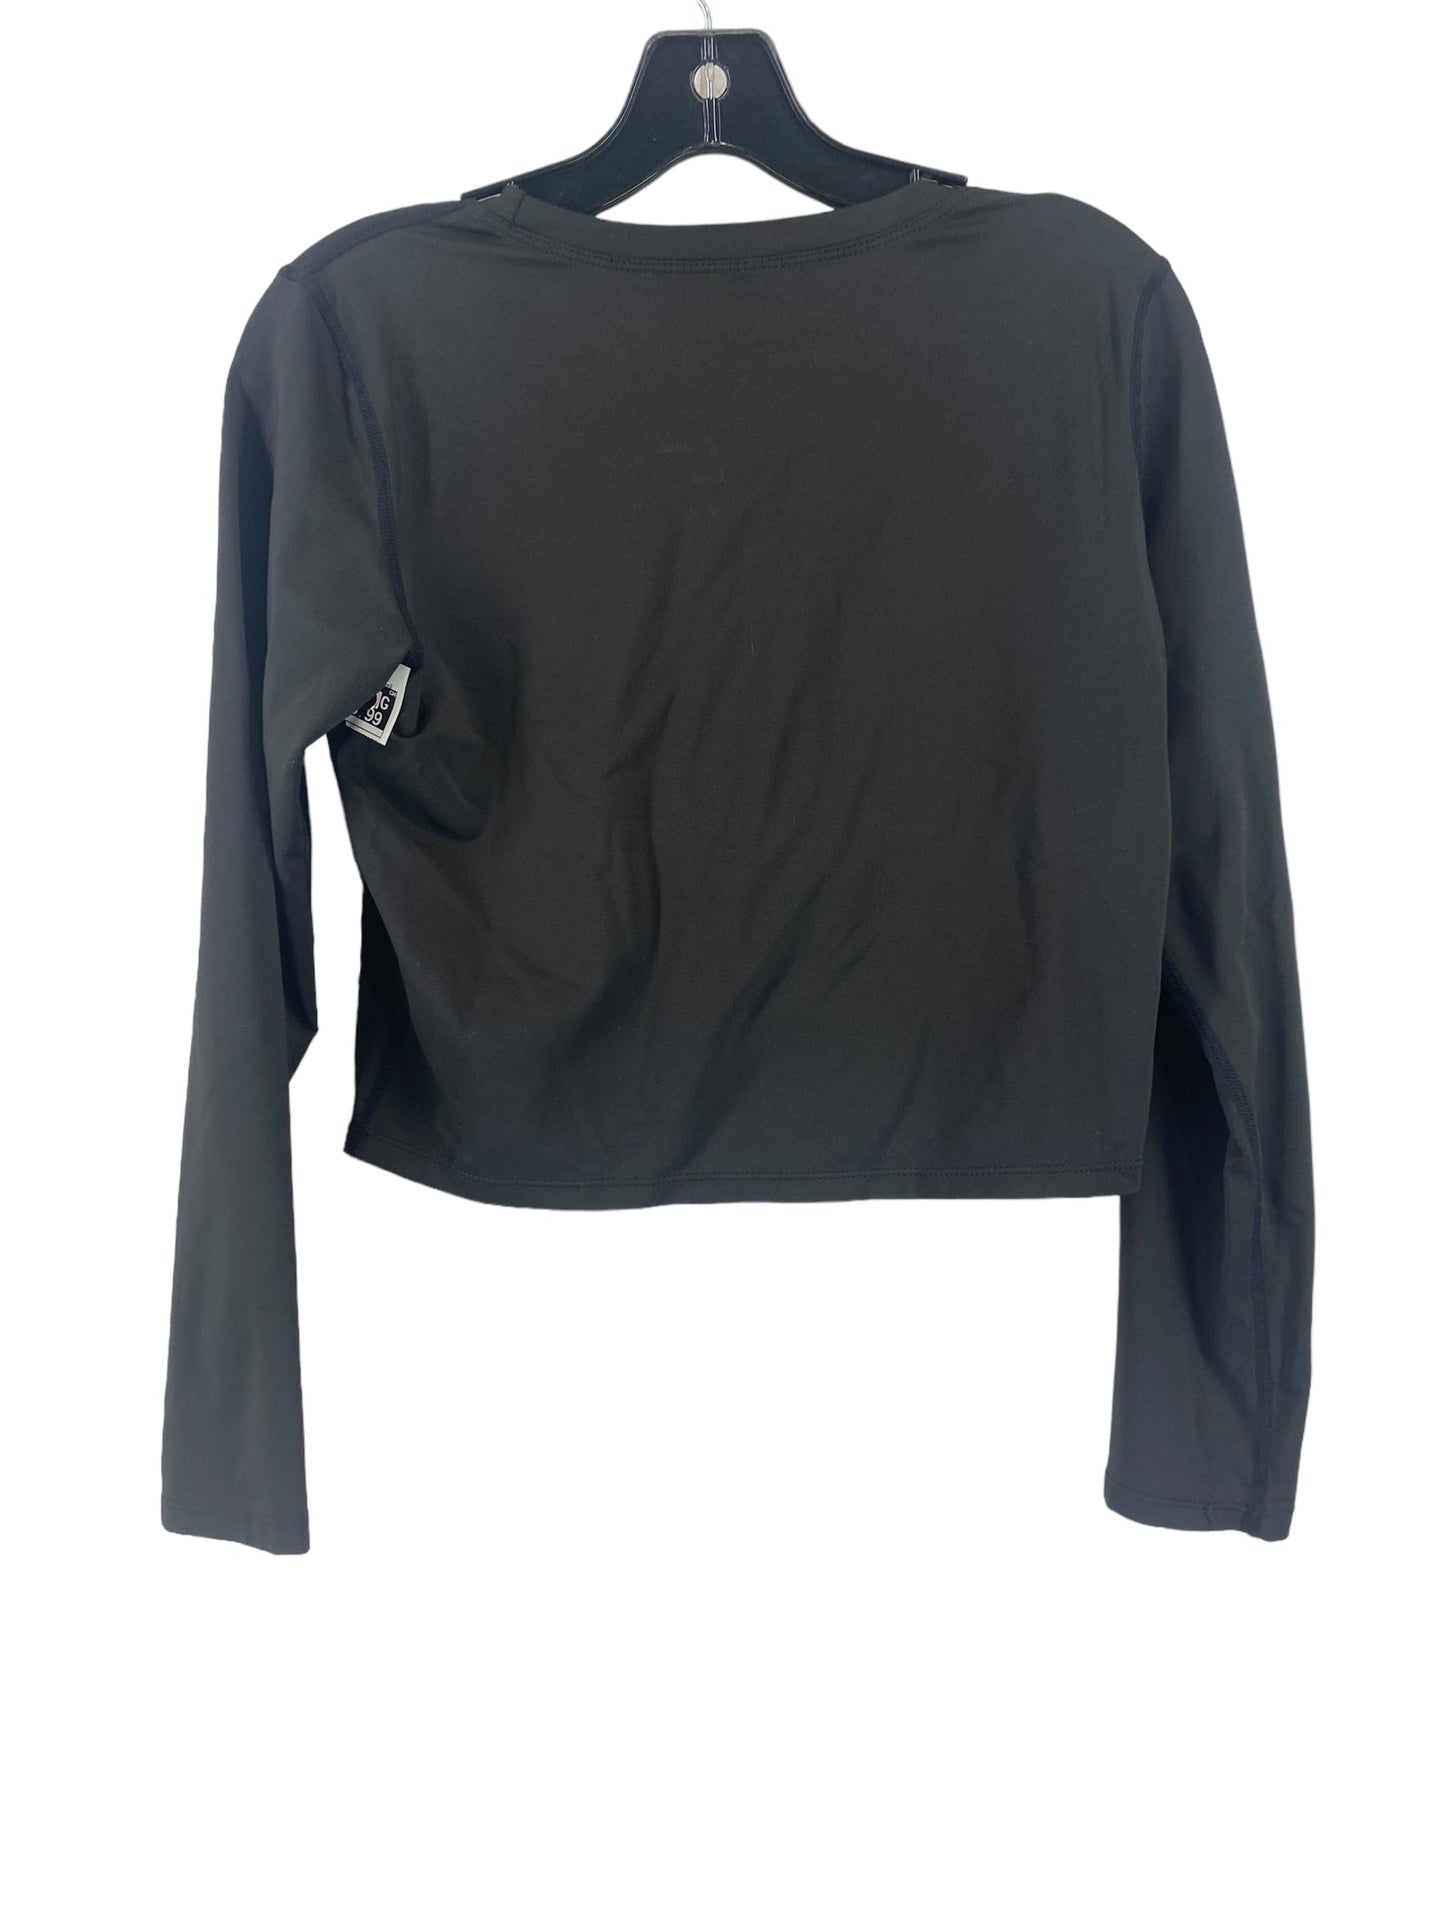 Black Athletic Top Long Sleeve Collar Clothes Mentor, Size M